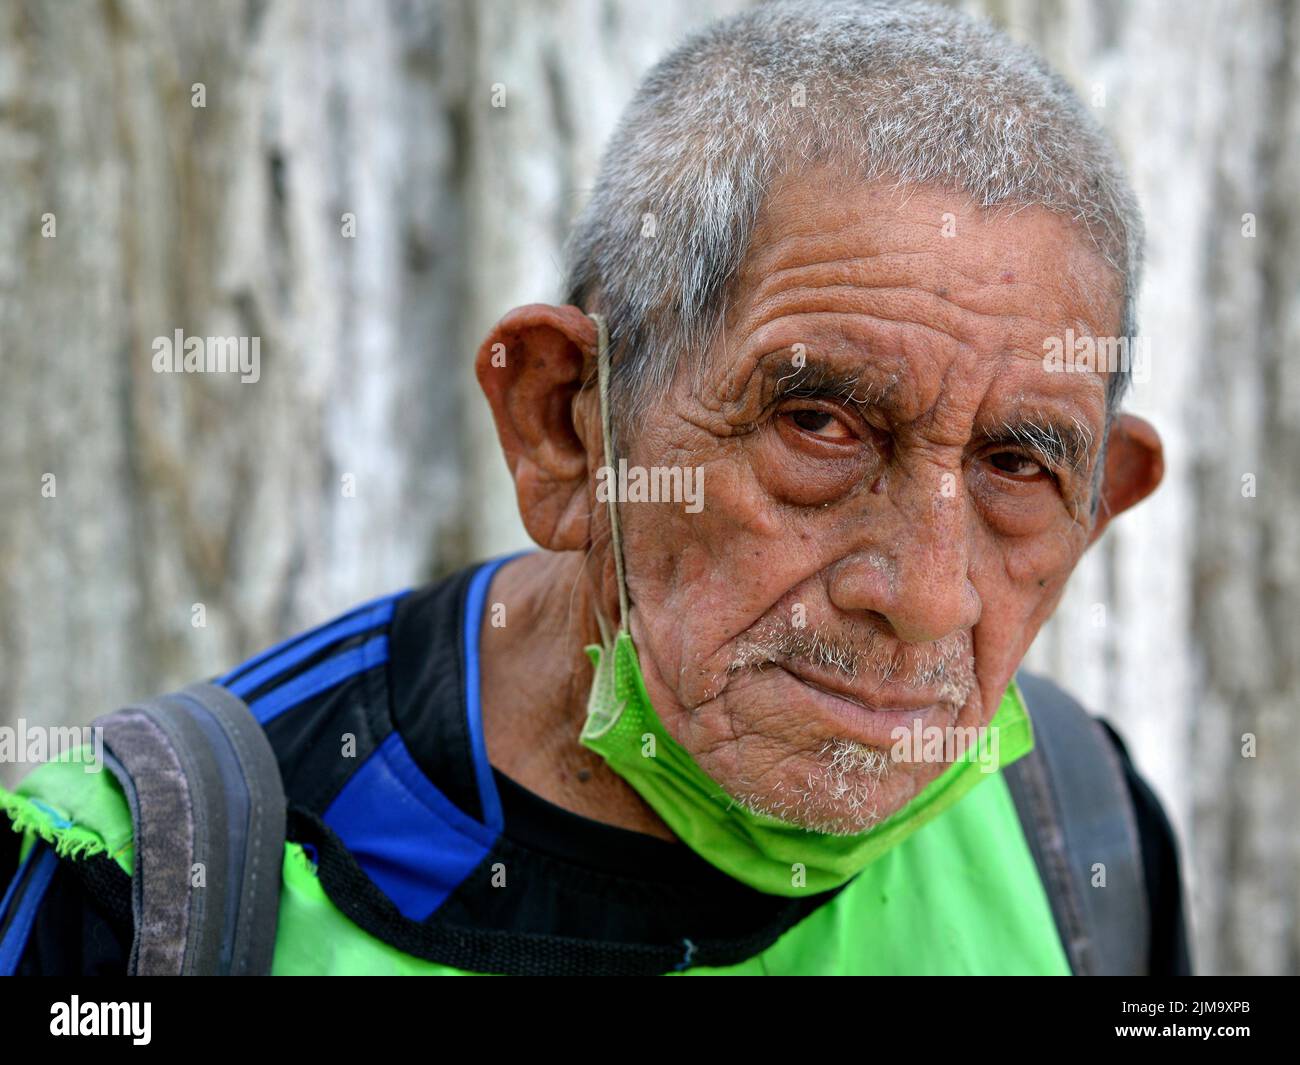 Streetwise poor old Mexican male senior citizen with homemade green fabric face mask under his chin looks silently at the viewer. Stock Photo